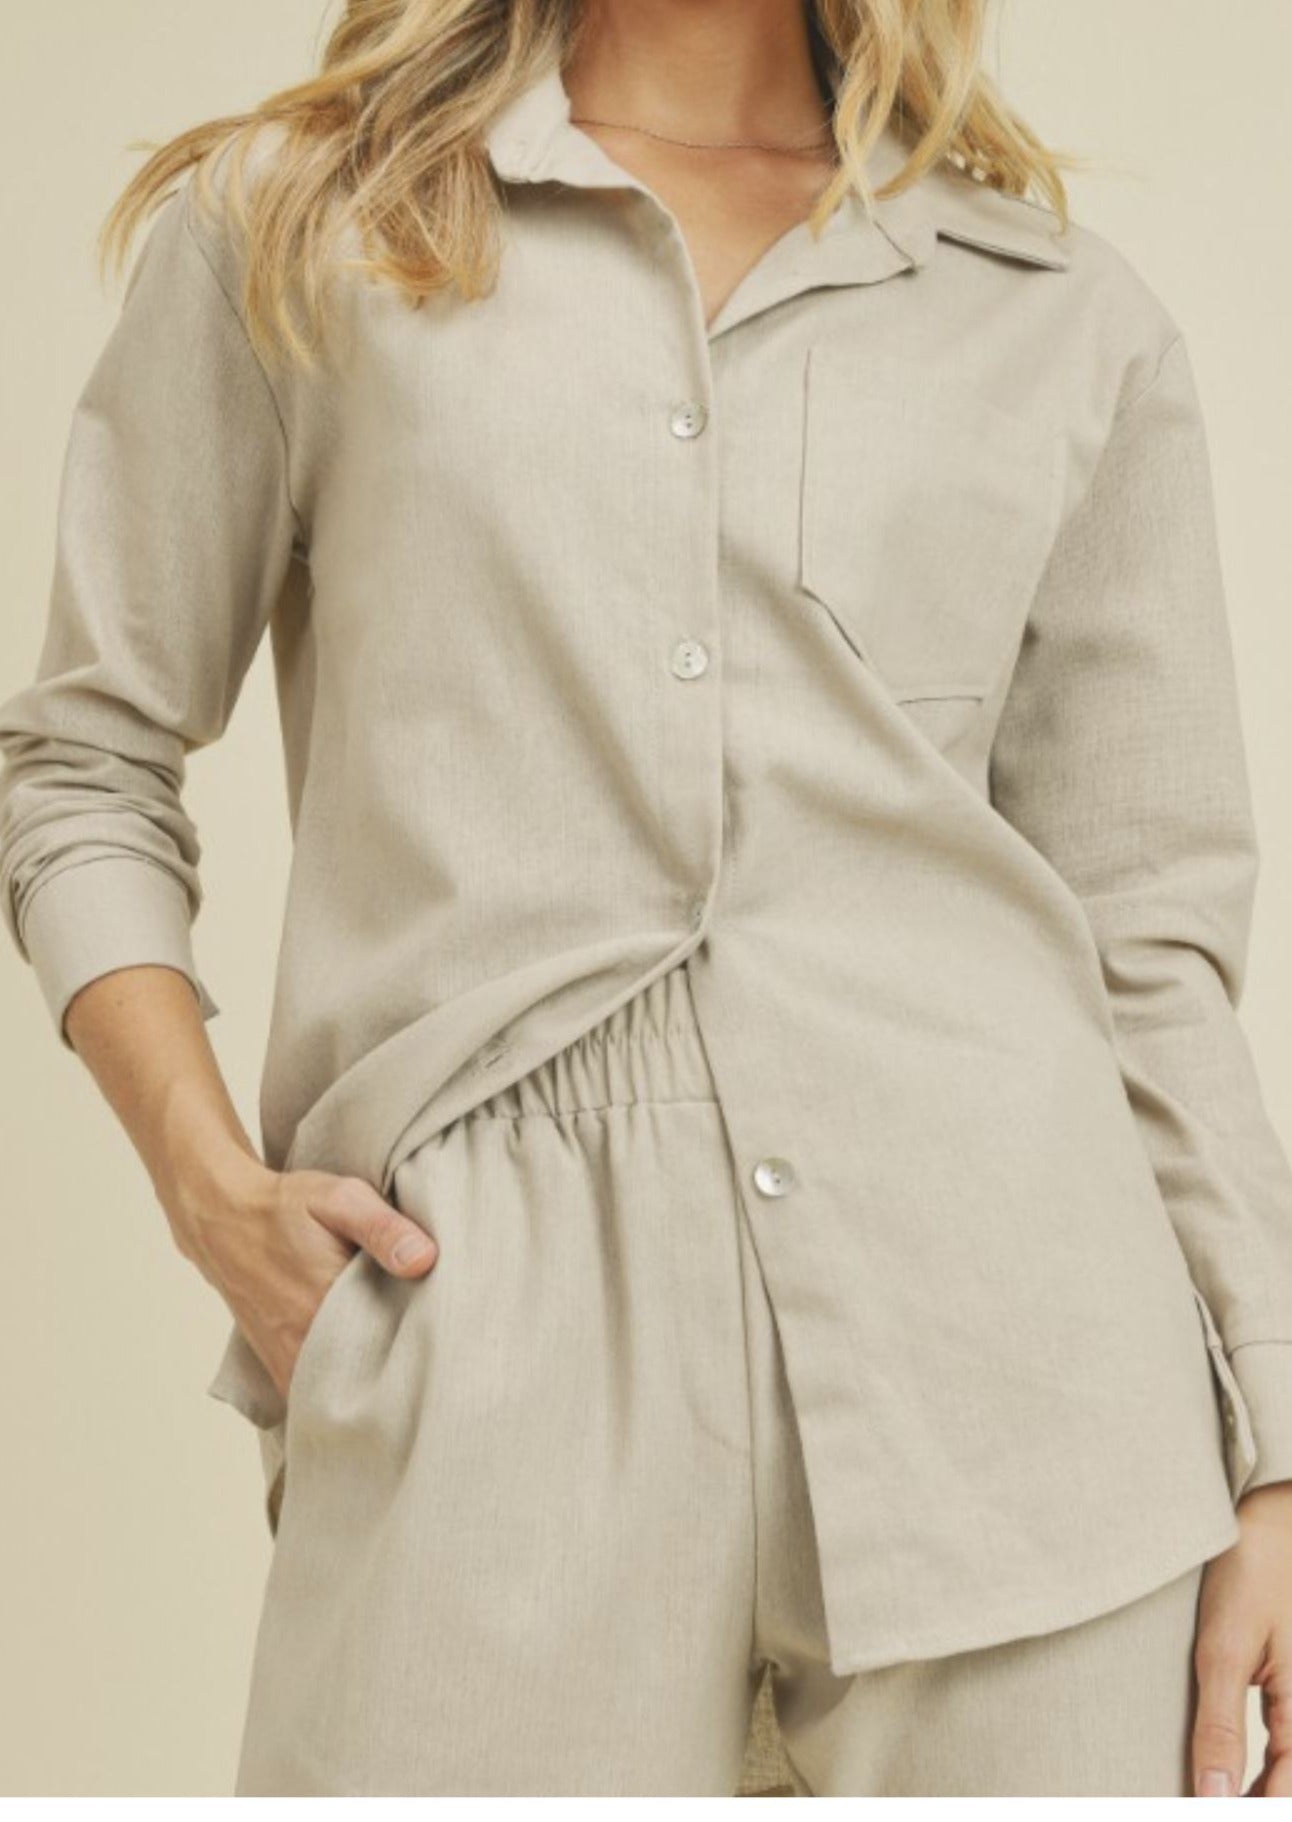 Brand: If She Loves | Dreamland Zion Button Down Linen Shirt | Style ISJK1173P | Made in USA & Sold by Classy Cozy Cool Women's Clothing Boutique